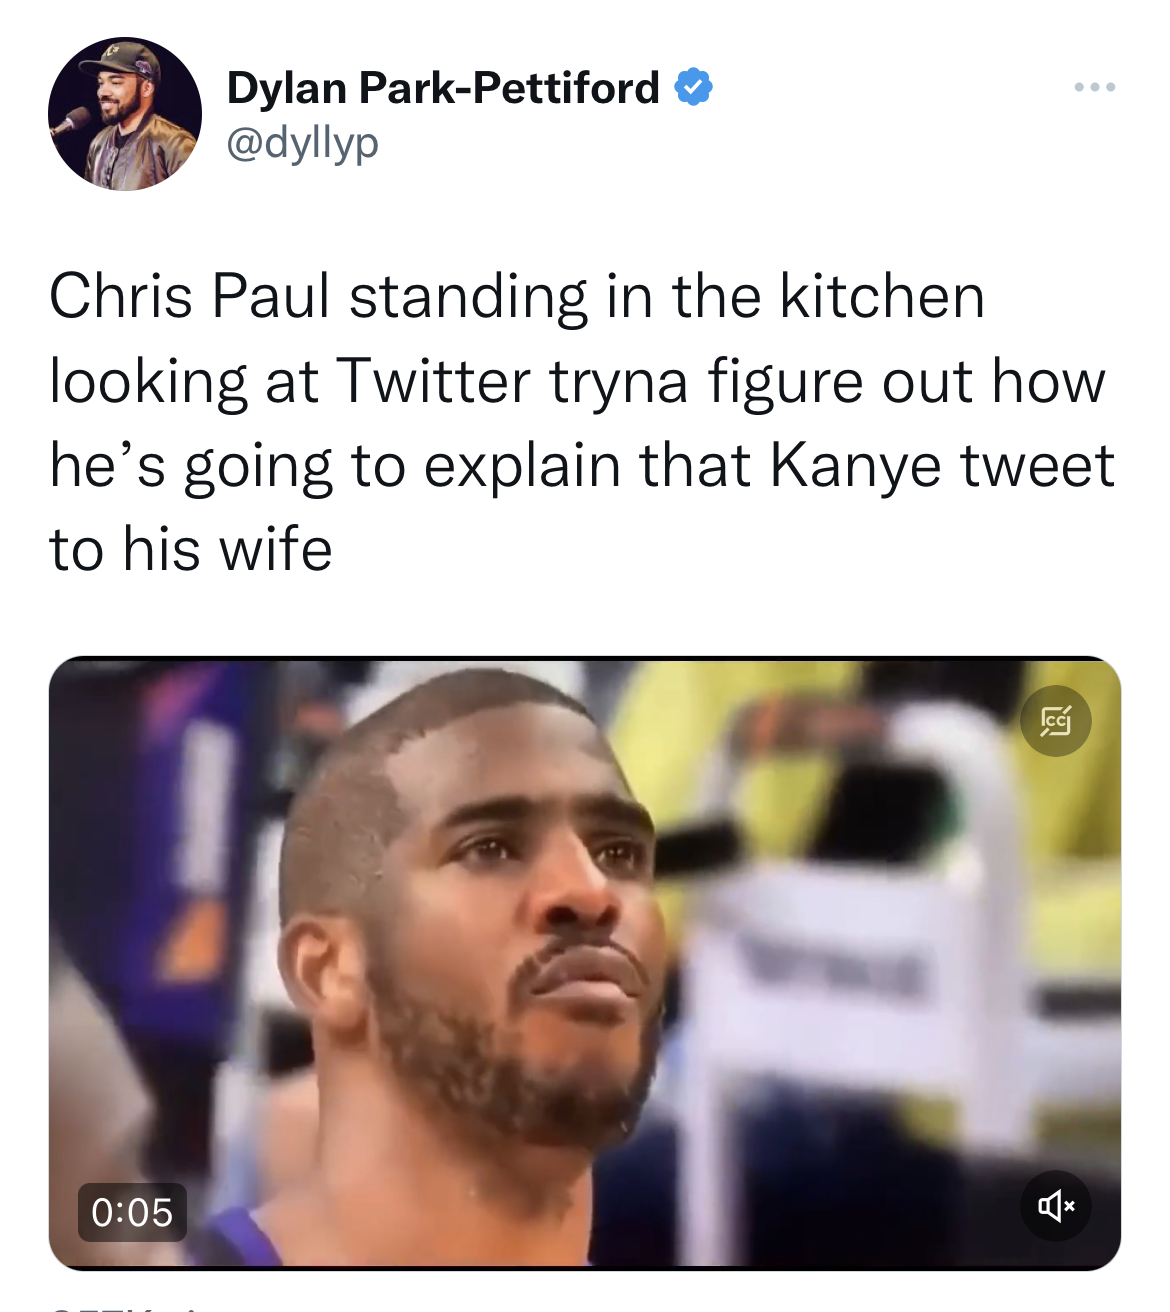 Chris Paul and Kim K memes - european union office in kosovo - Dylan ParkPettiford Chris Paul standing in the kitchen looking at Twitter tryna figure out how he's going to explain that Kanye tweet to his wife Fe